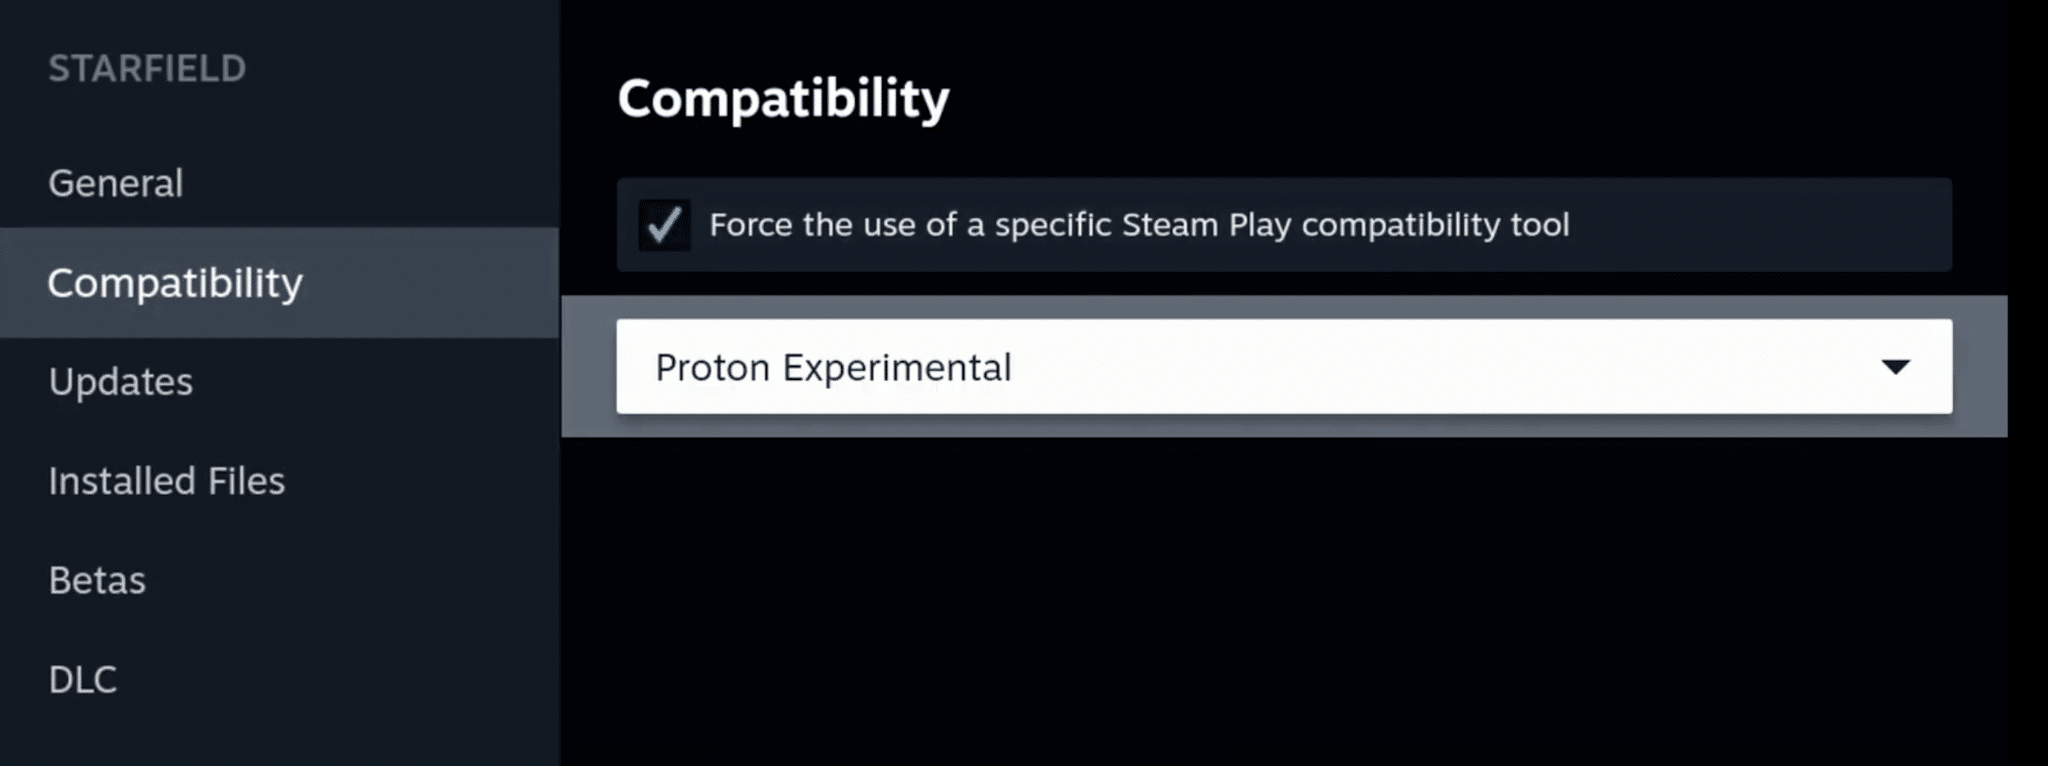 Starfield Proton Experimental on the Steam Deck